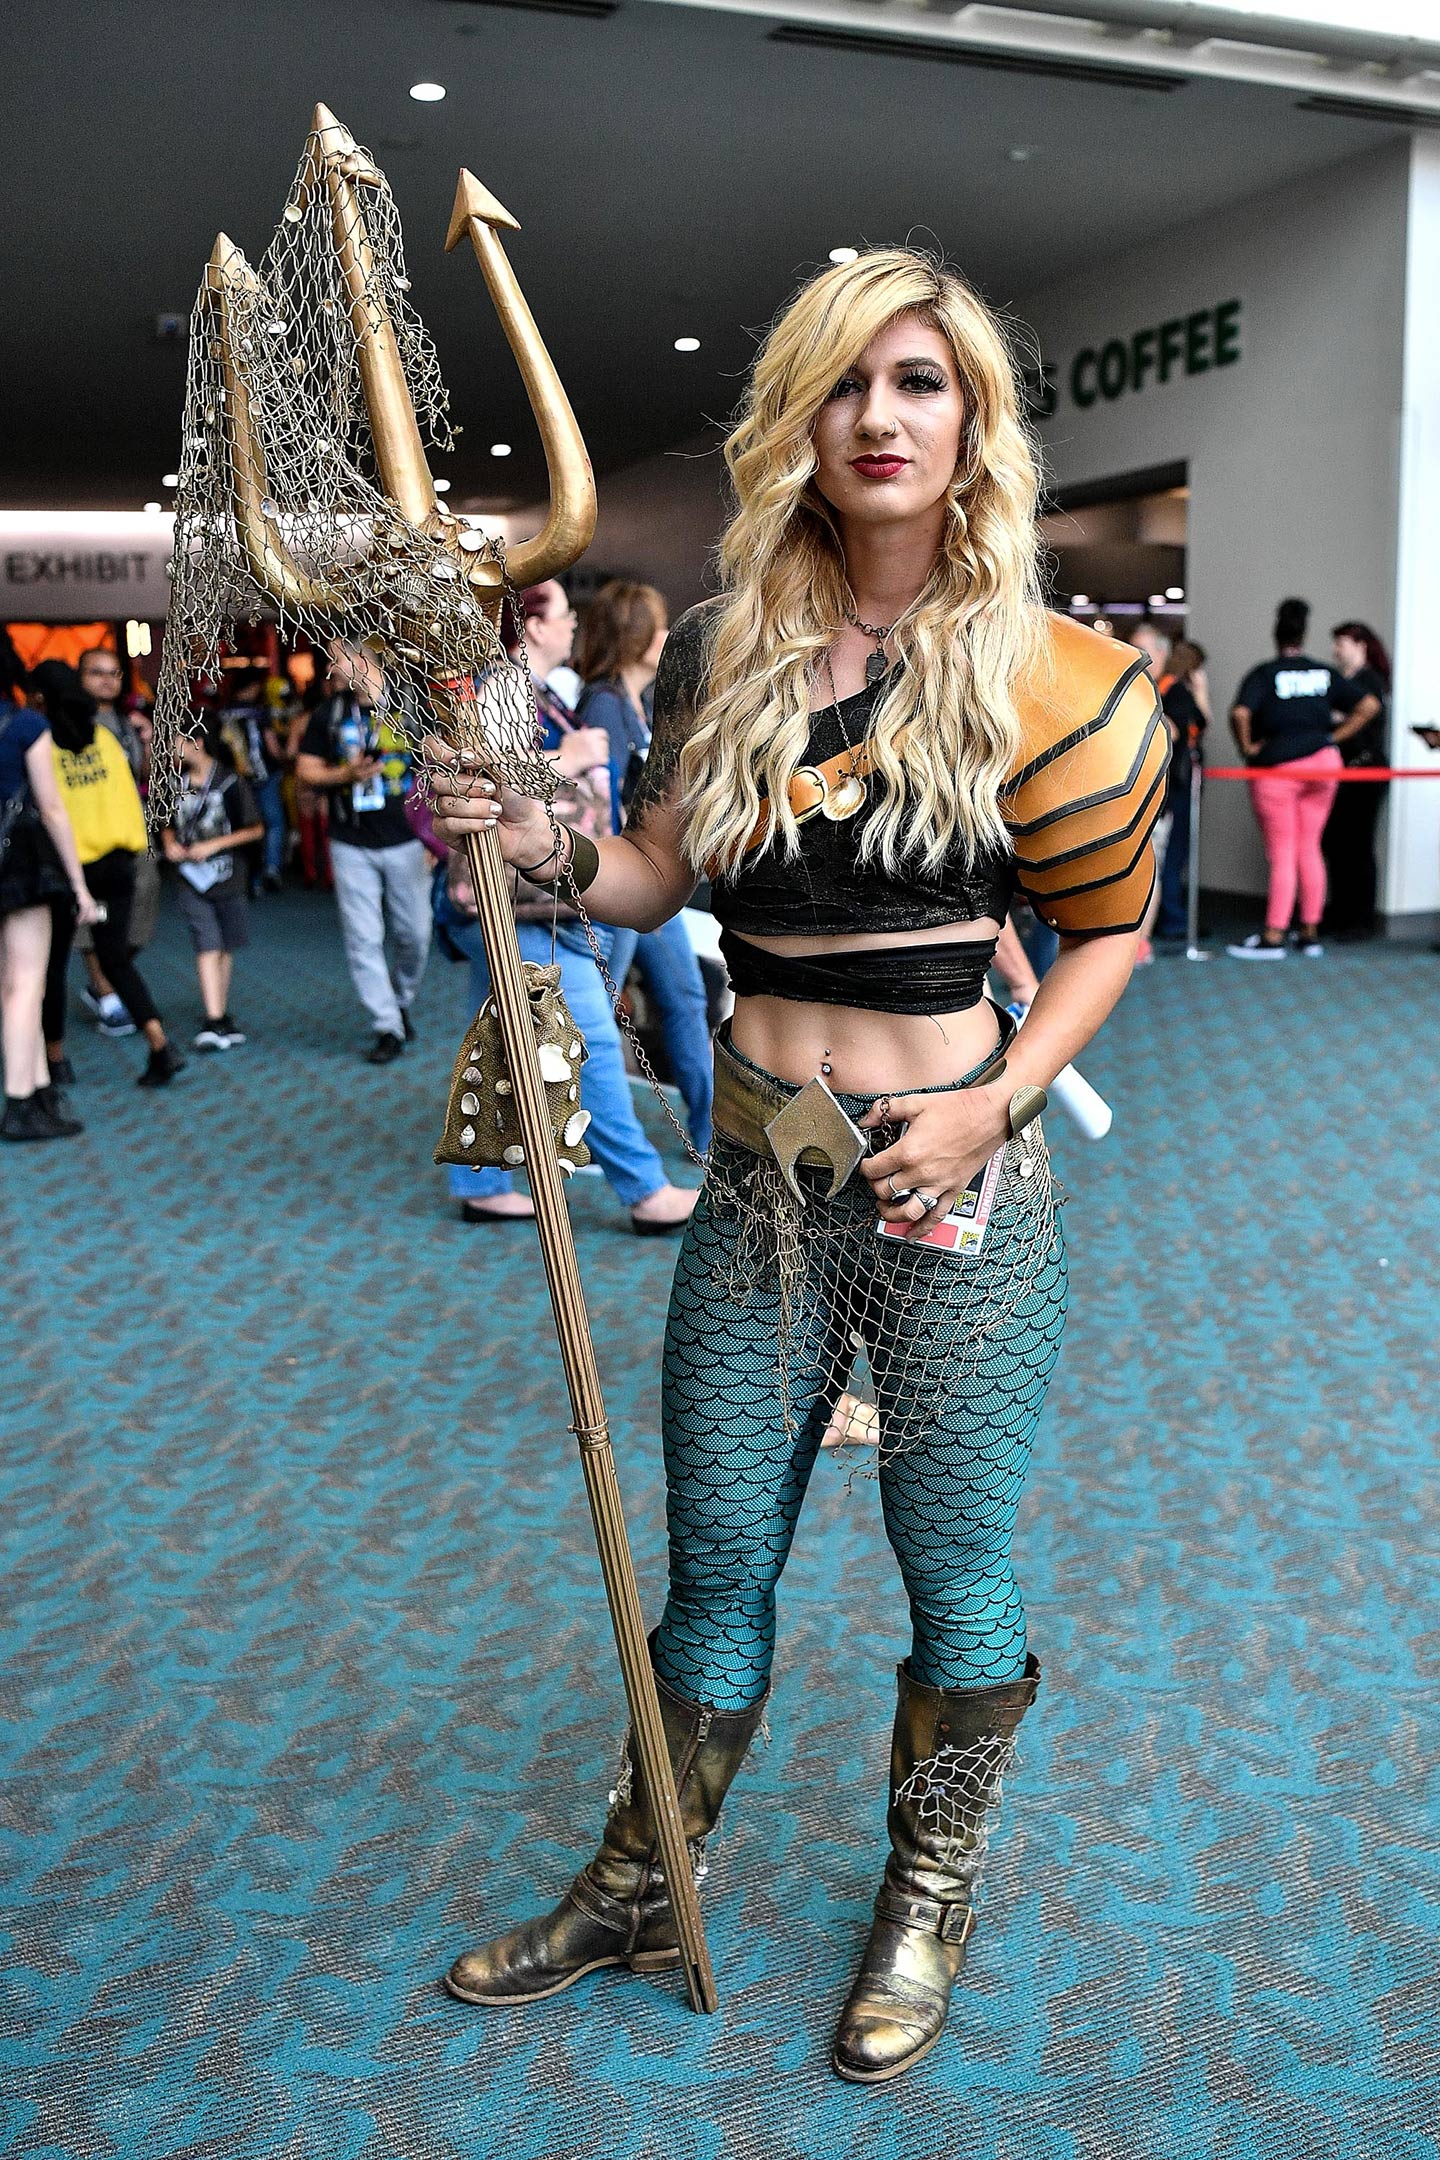 See the Best Costumes From San Diego ComicCon 2017 InsideHook